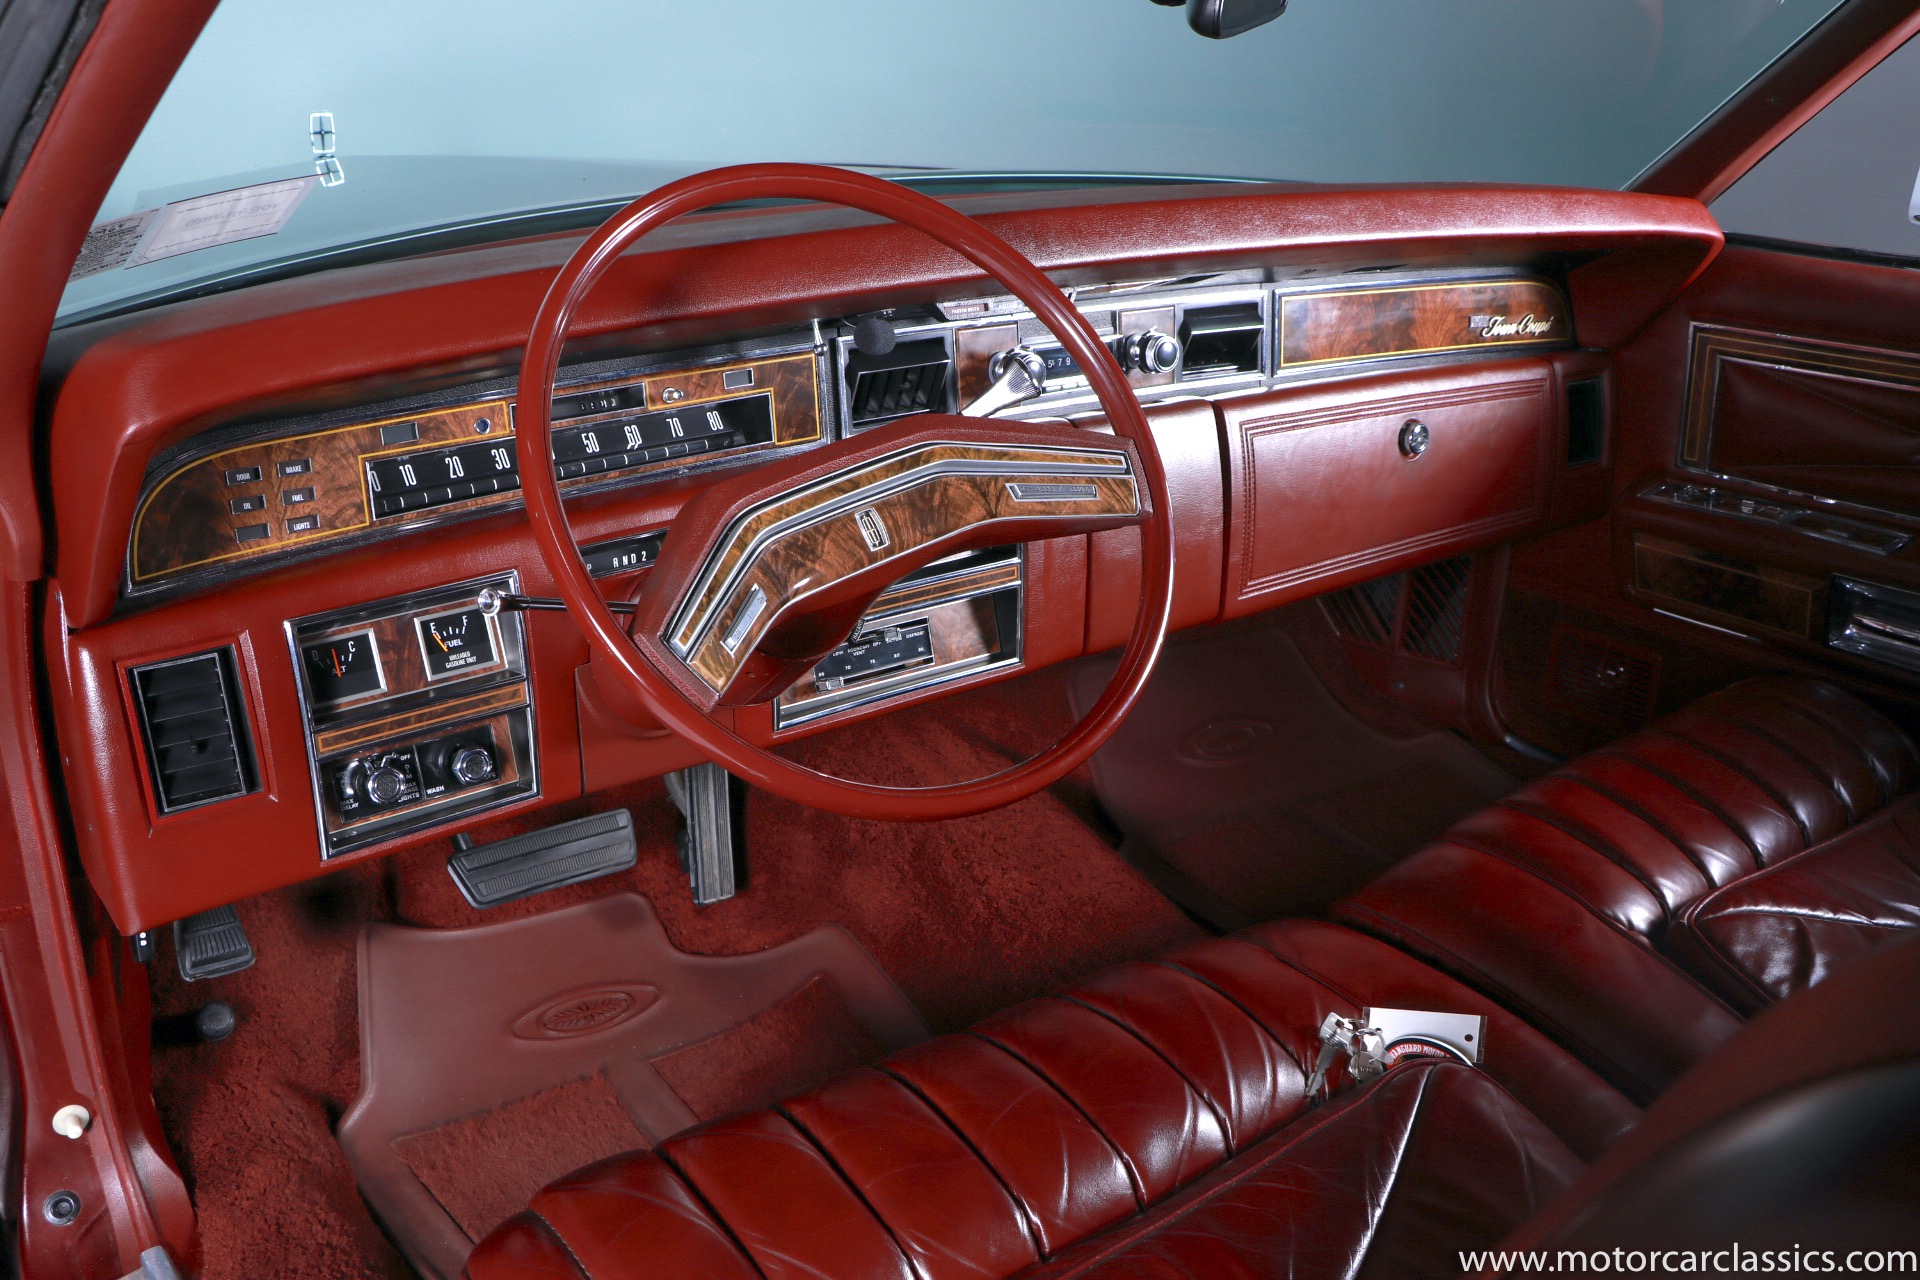 1977 Lincoln Continental Town Coupe